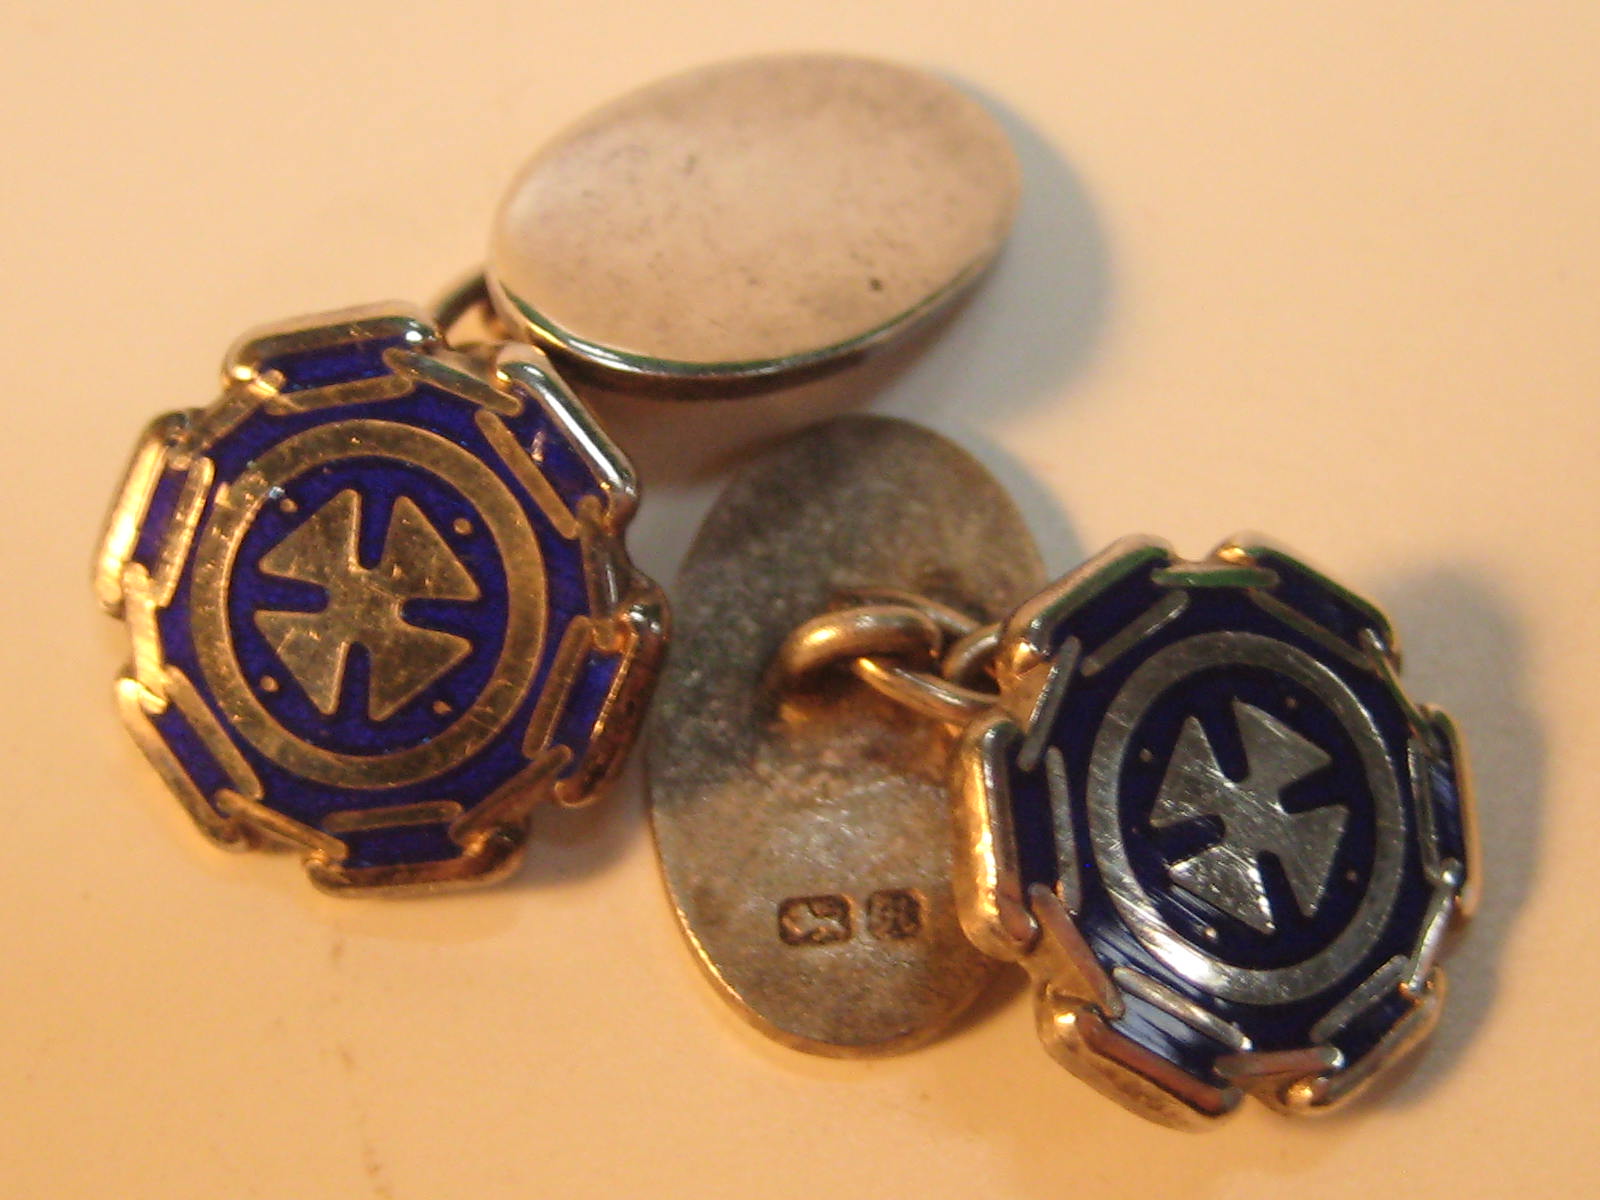 A pair of silver and blue enamel cufflinks